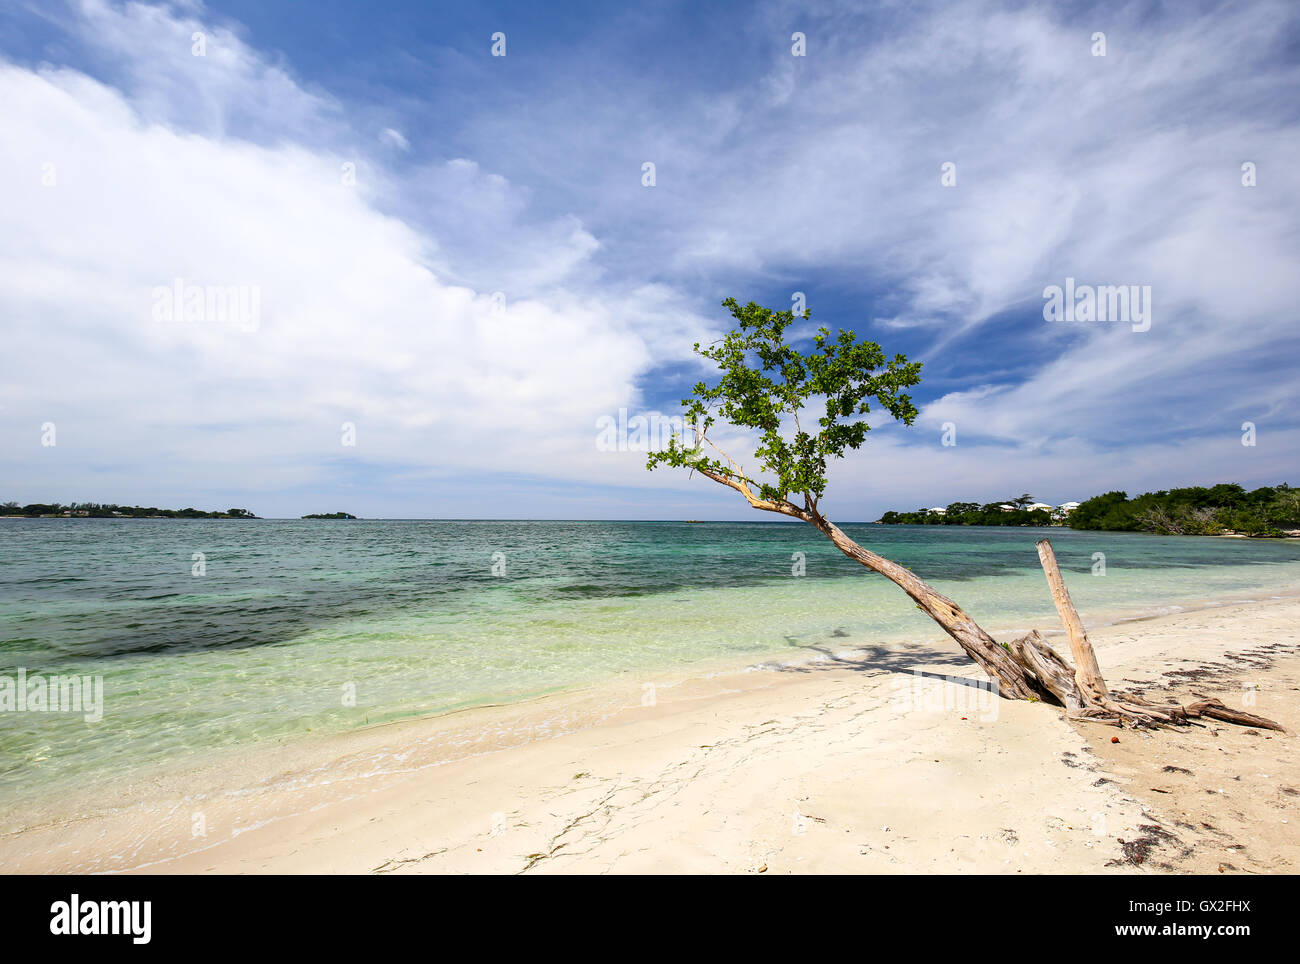 Tropical beach with a barren green tree and blue sky. Stock Photo